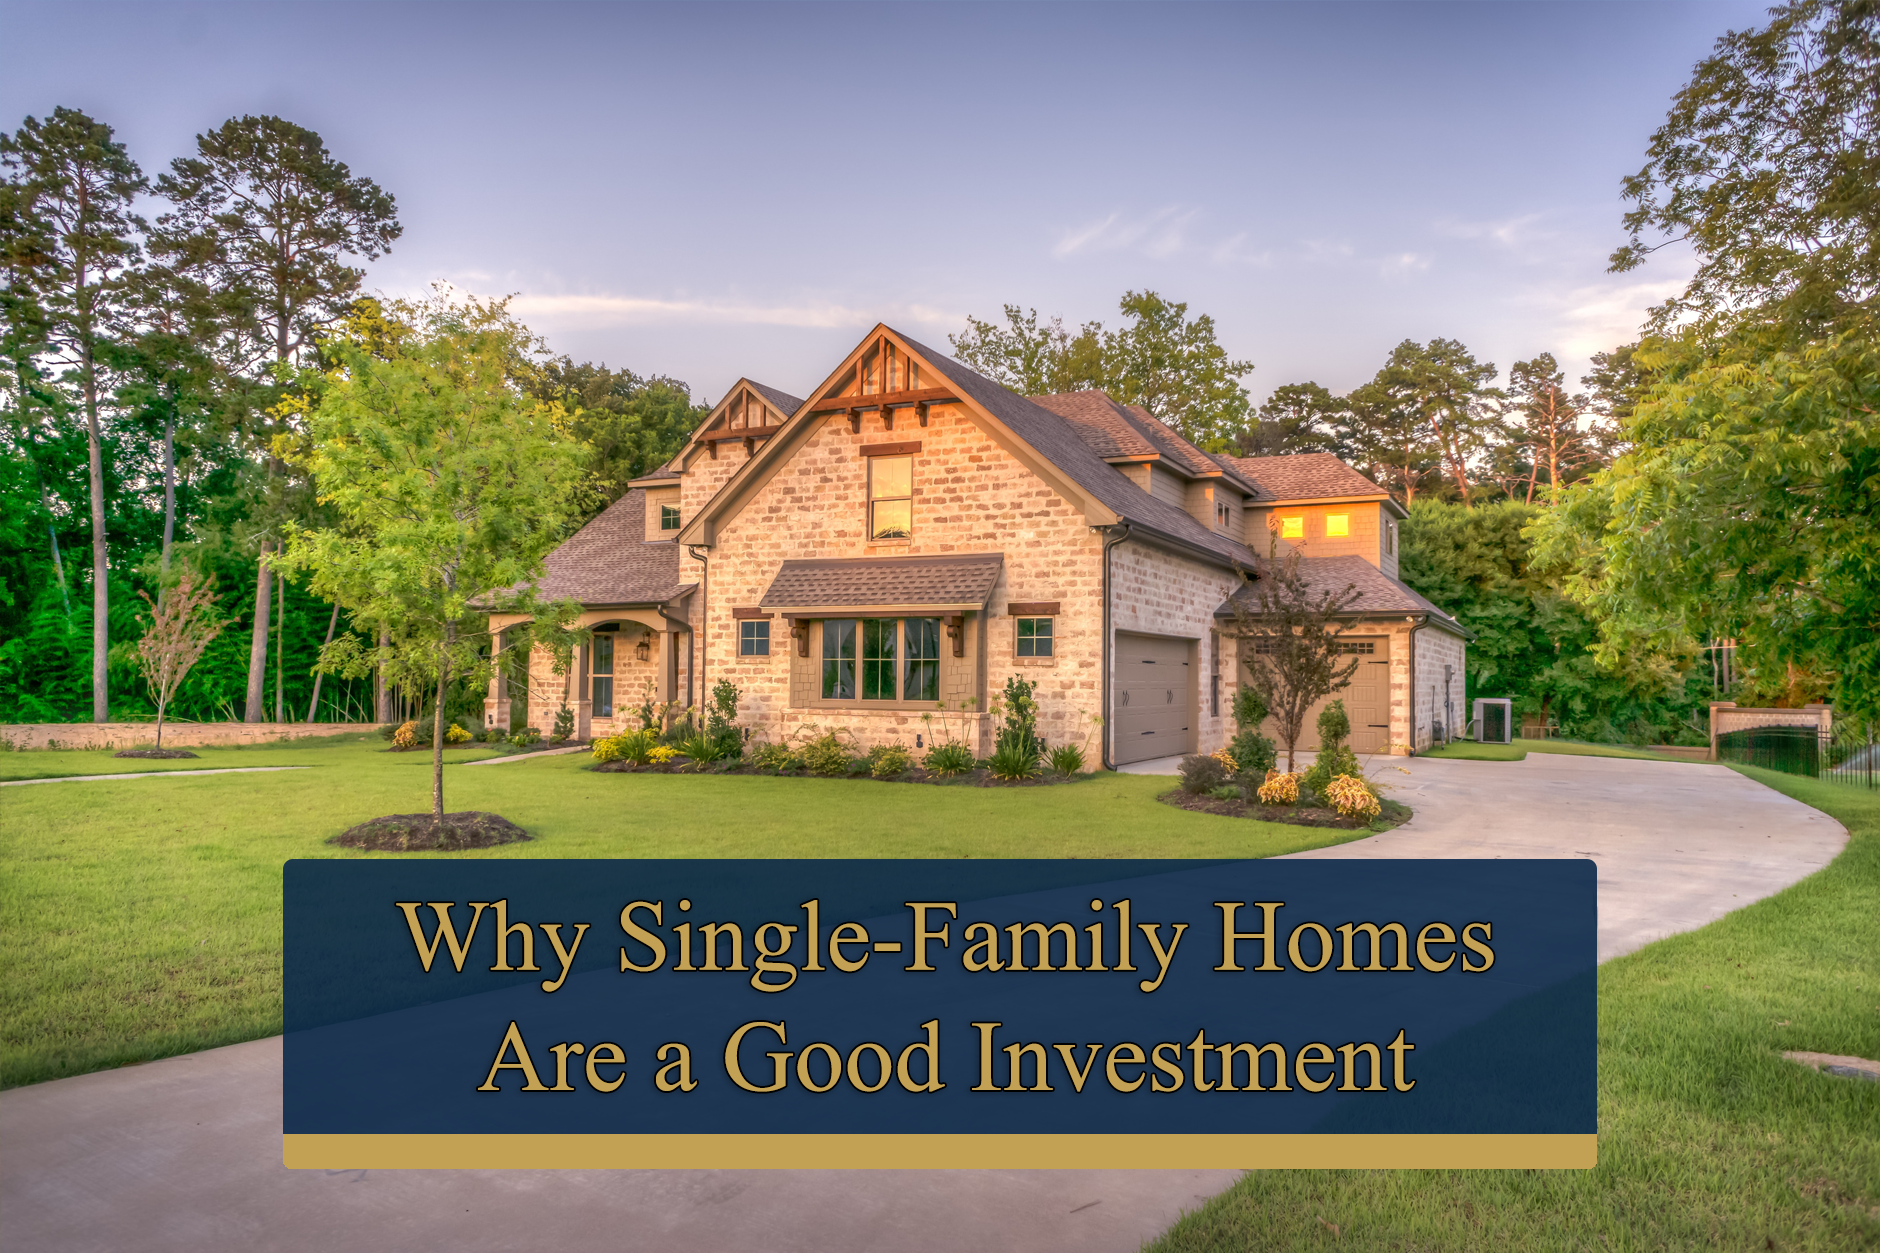 Why Single-Family Homes are a Good Investment